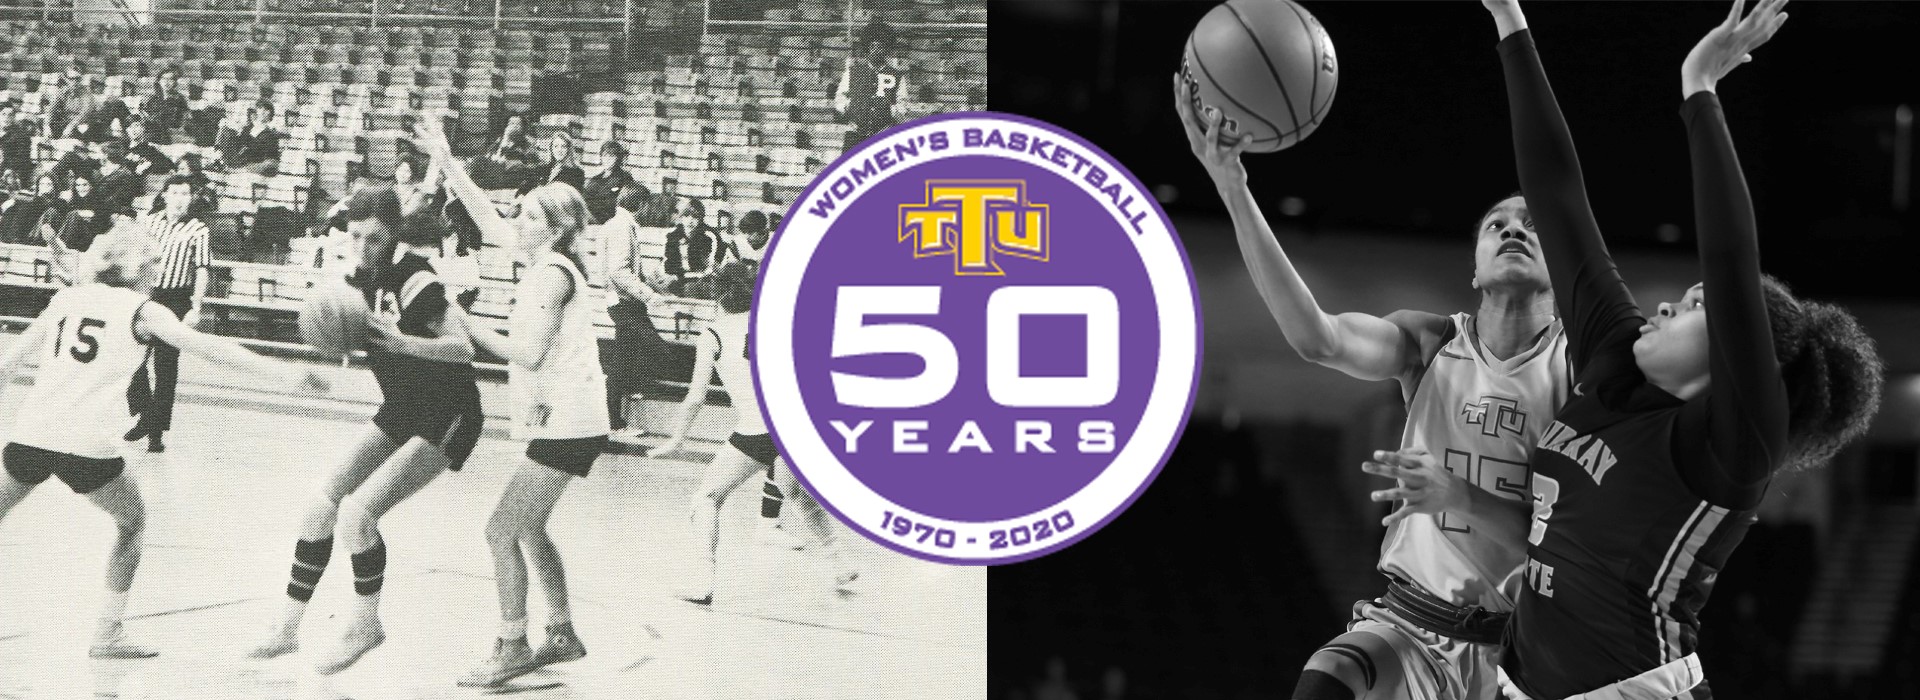 A classic photo and modern photo of Tech women's basketball. There is a 50 years logo in the center of the graphic.